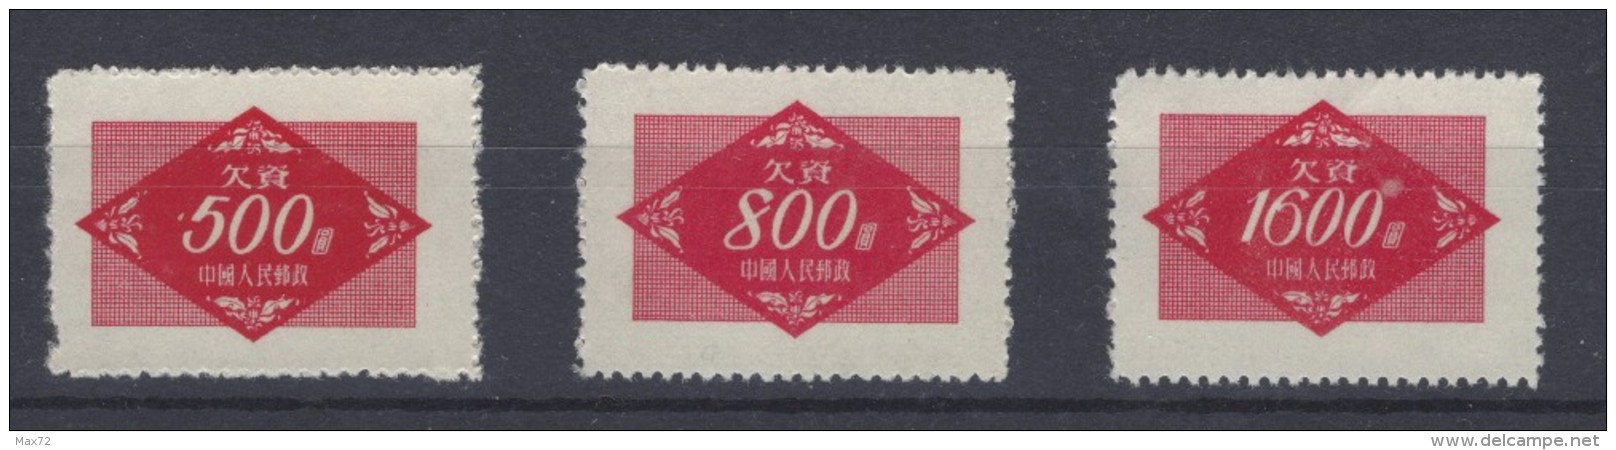 1954 CHINA MILITAR STAMPS MICHEL NR 12/14 MNH WG LIKE USUAL - Military Service Stamp